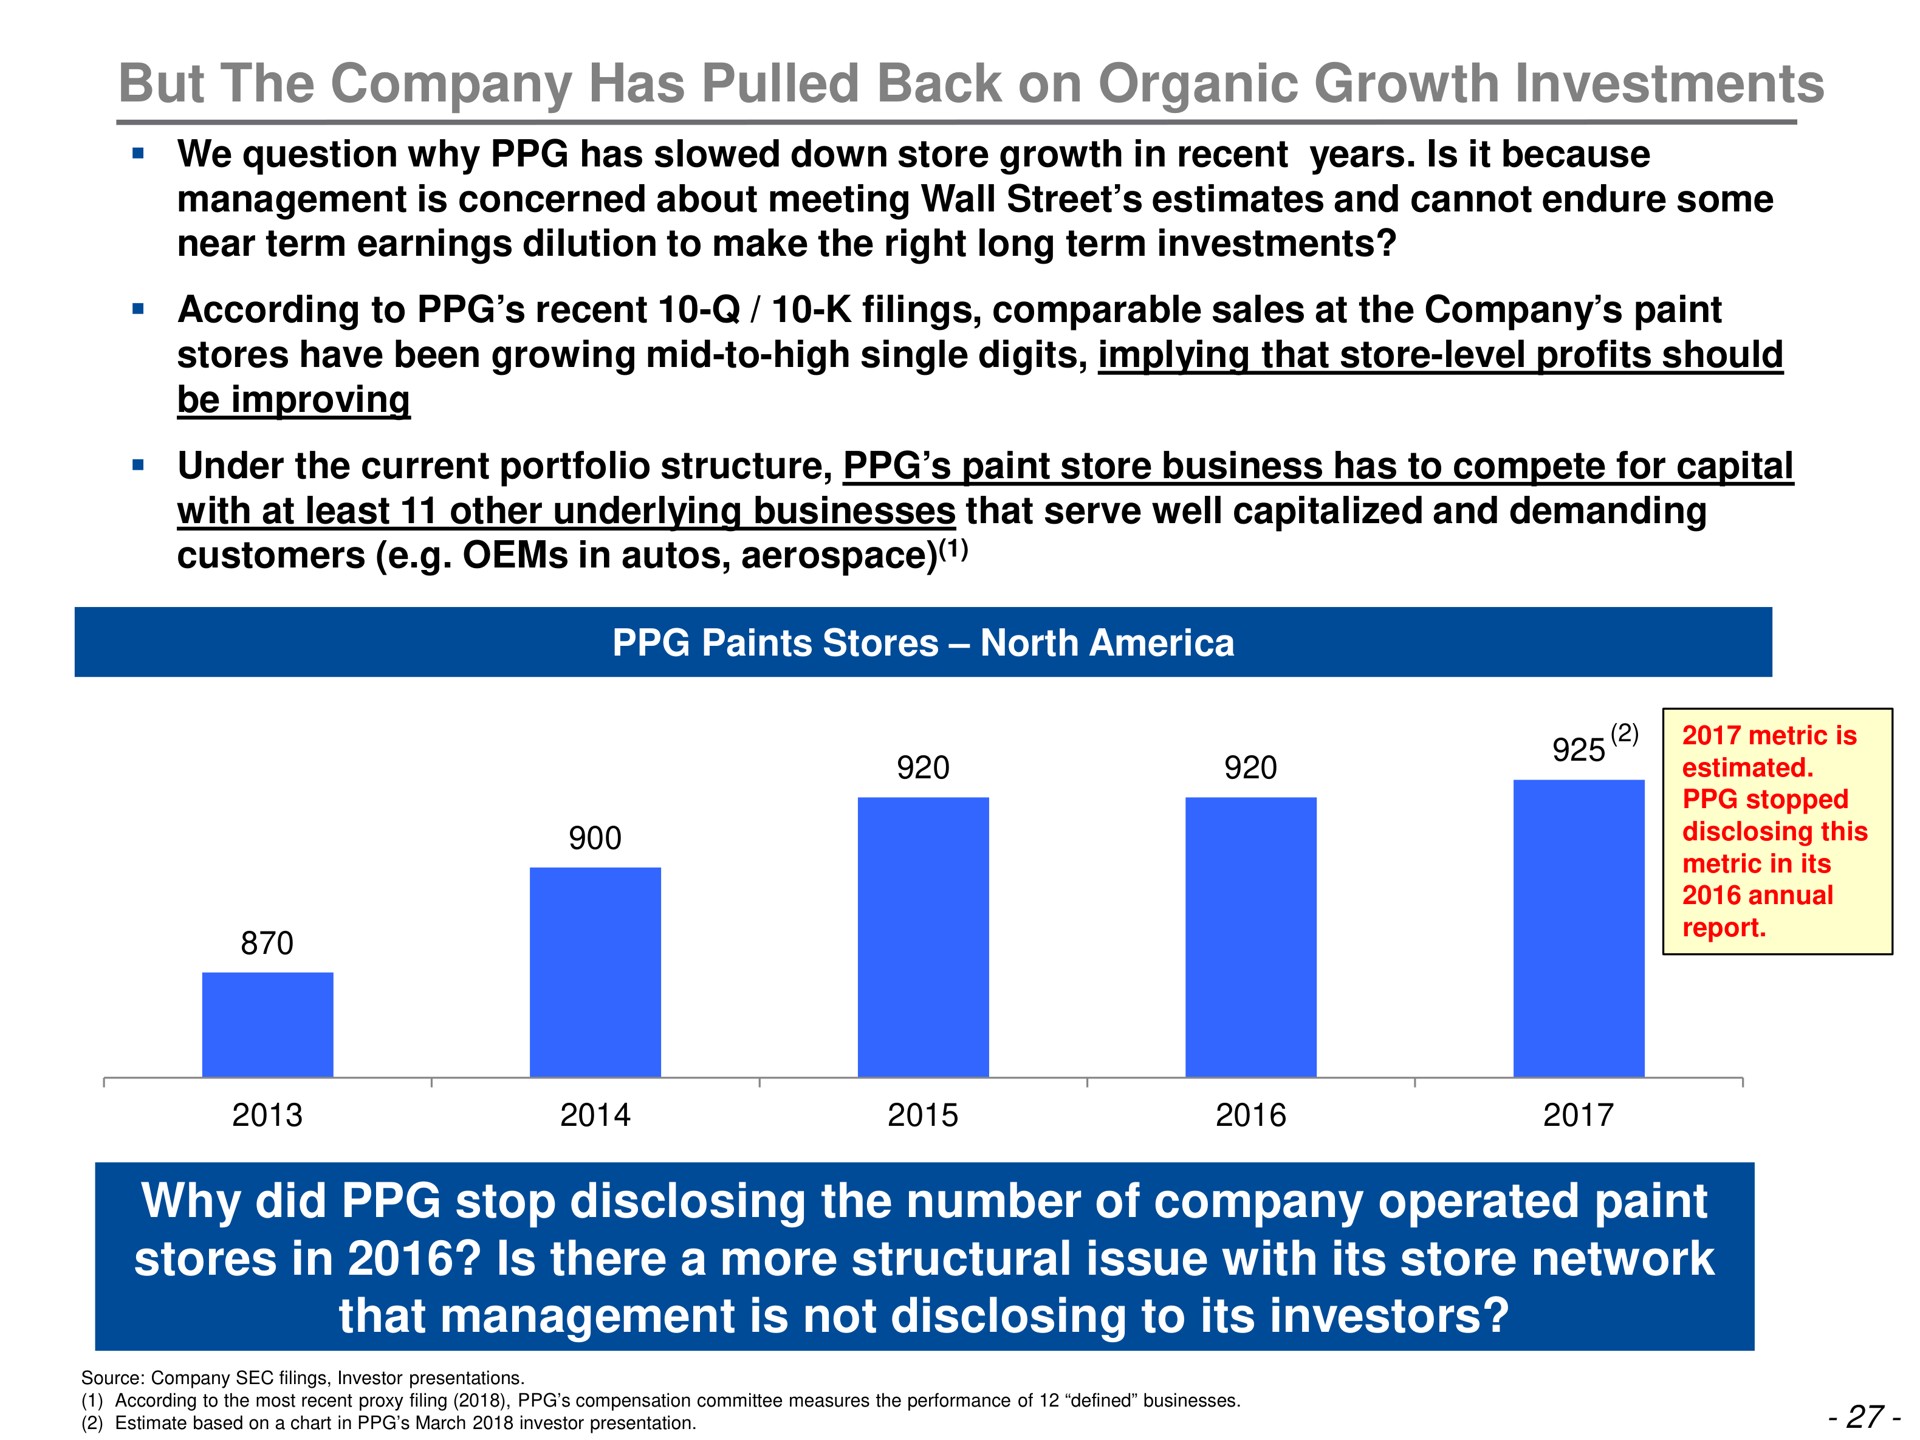 but the company has pulled back on organic growth investments why did stop disclosing the number of company operated paint stores in is there a more structural issue with its store network that management is not disclosing to its investors | Trian Partners